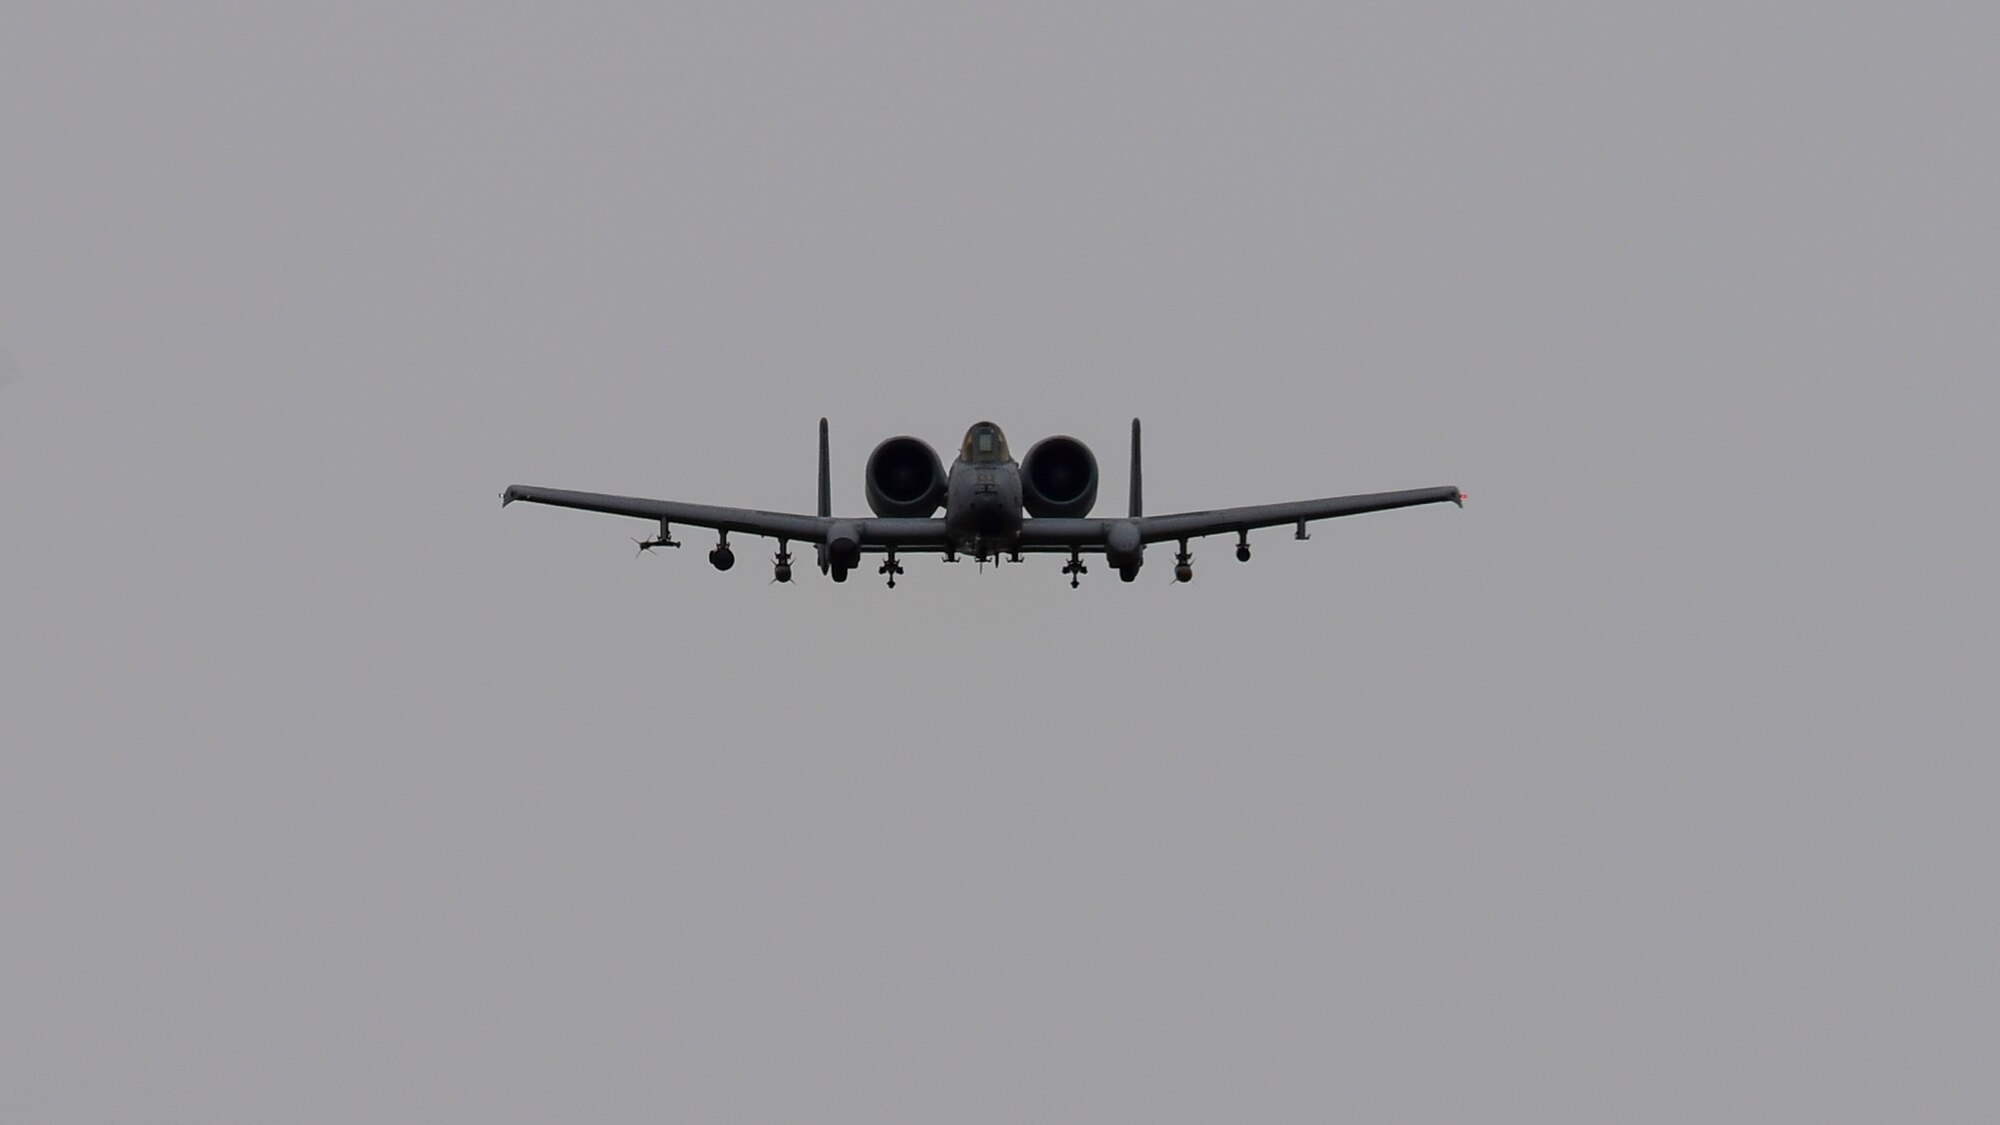 A photo of an aircraft flying